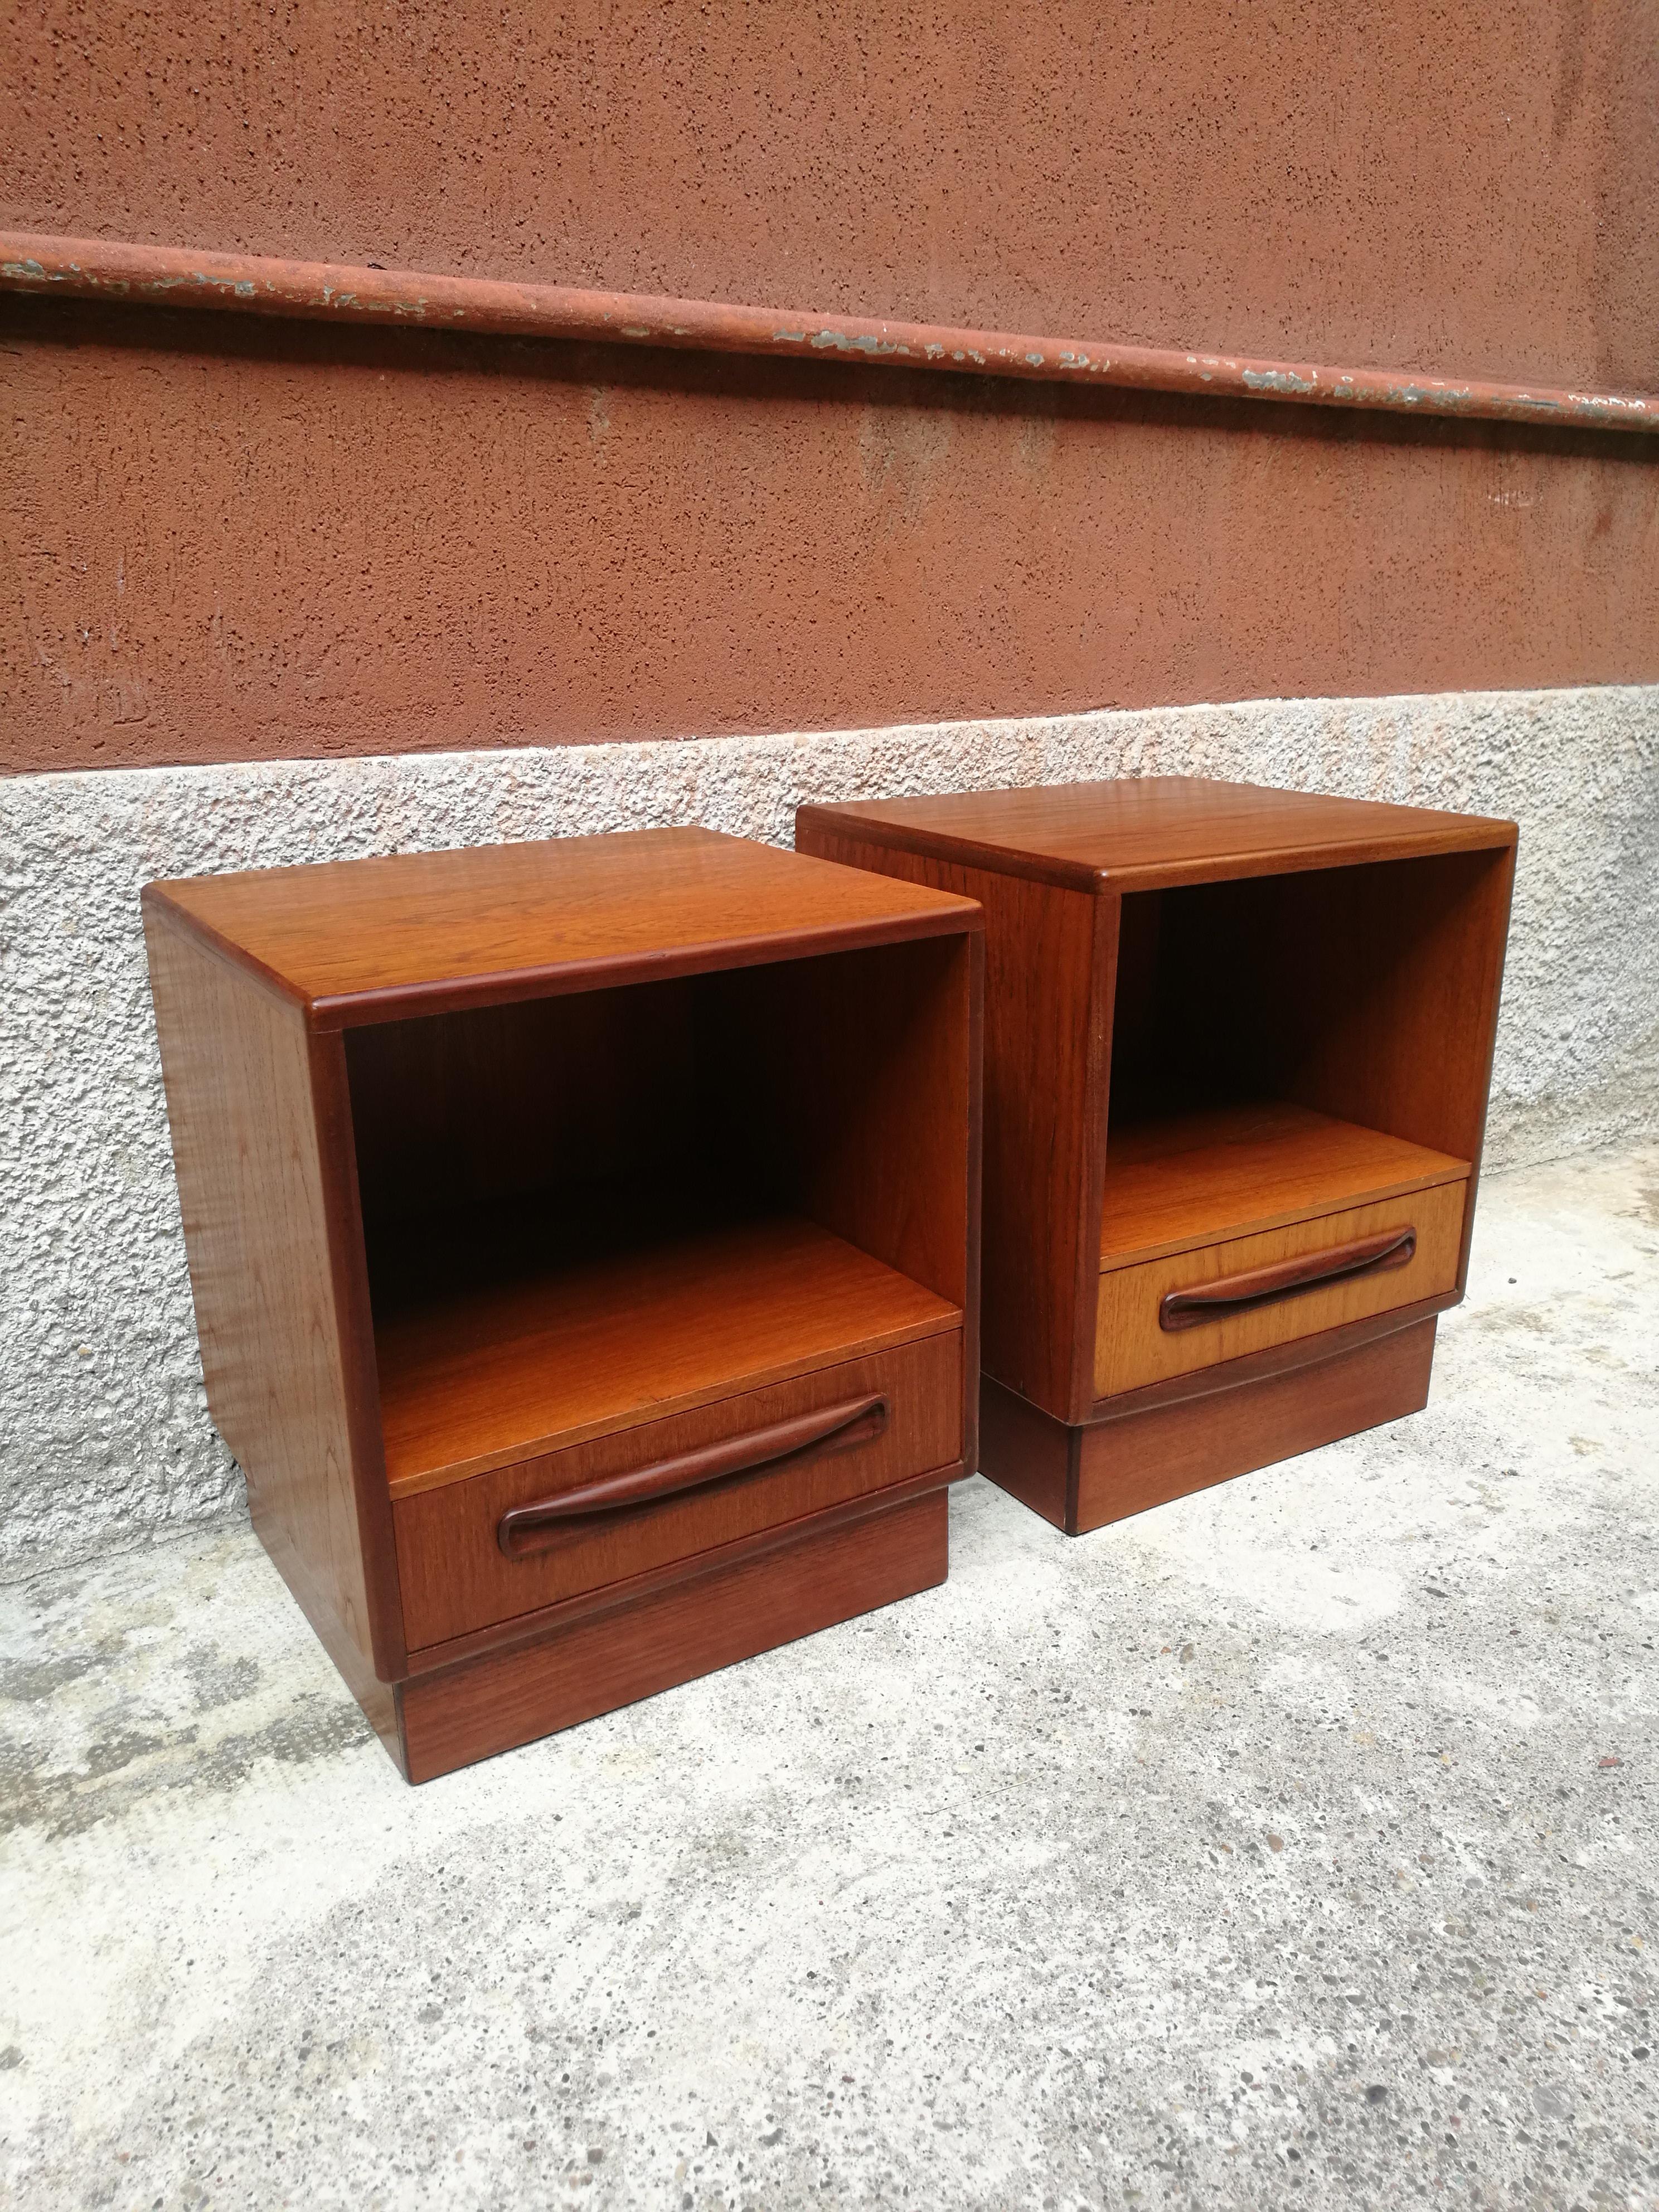 Beautiful pair of vintage Scandinavian style bedside table, published by GPLAN and dating from the 60s. Entirely made of Teak, manufacture and finishing of high quality. Drawer with handle in an organic design, remarkable. Rounded angles and edges.